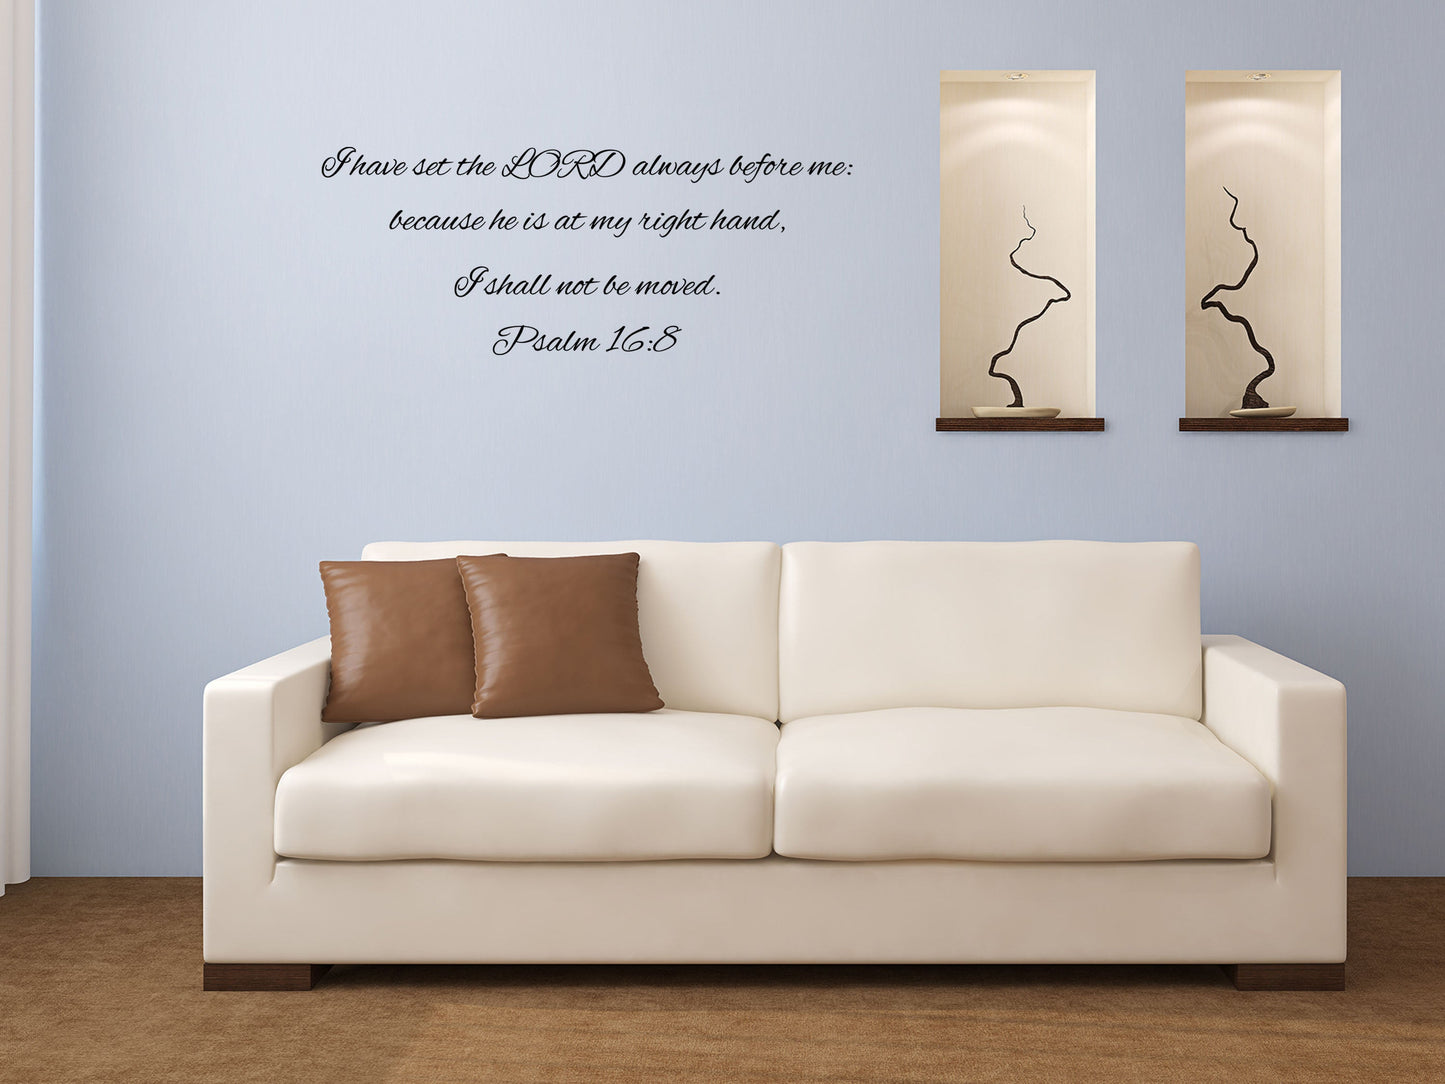 Psalm 16:8 - Religious Wall Decals Vinyl Wall Decal Inspirational Wall Signs 